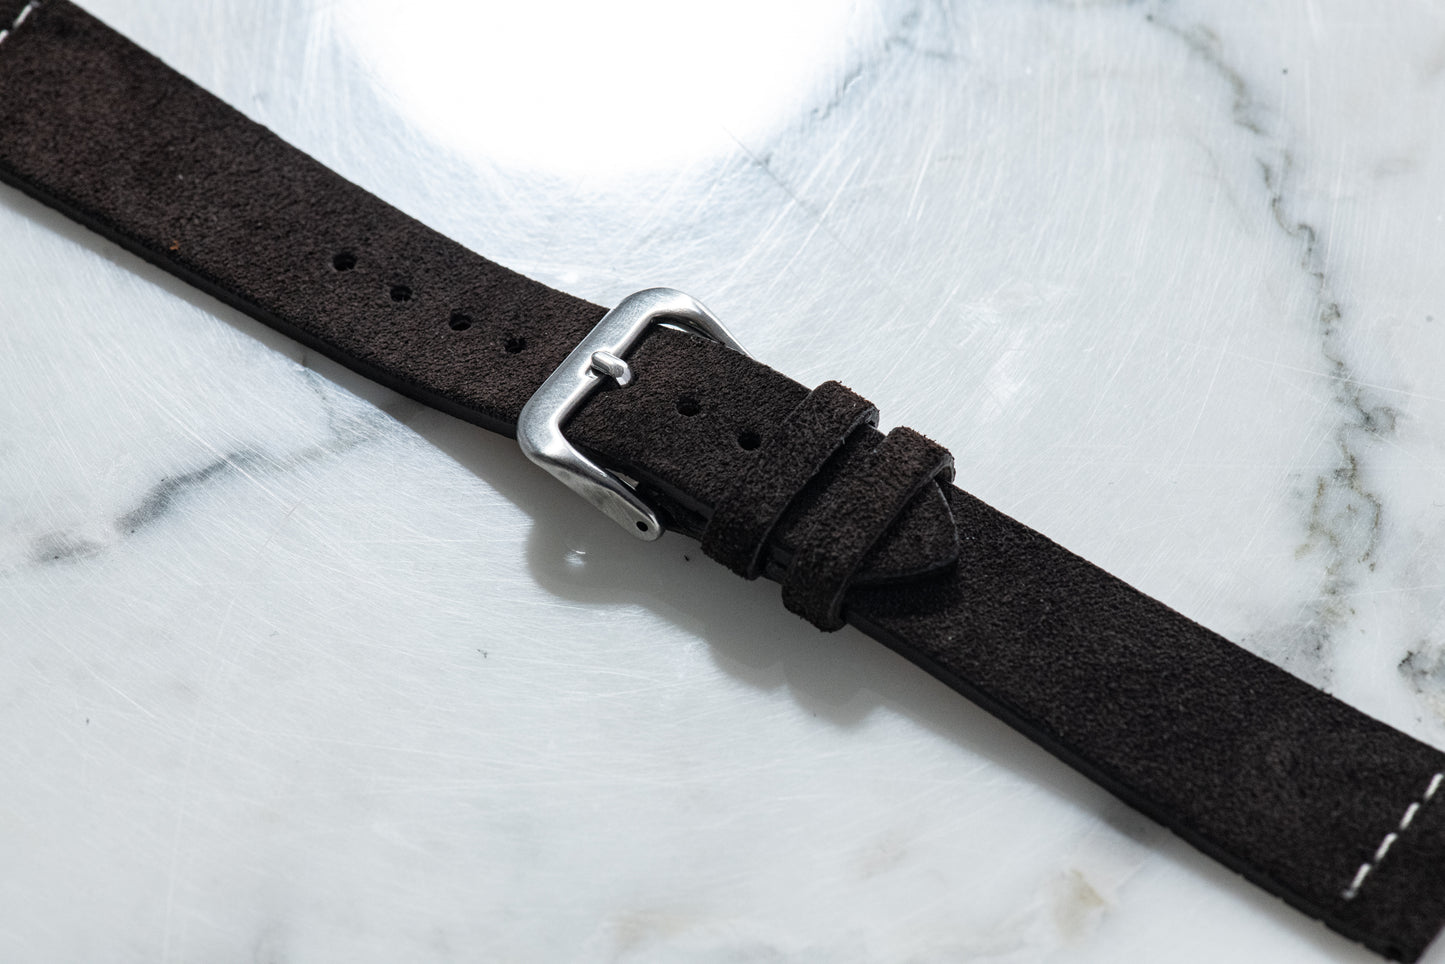 Islay Brown Suede Strap